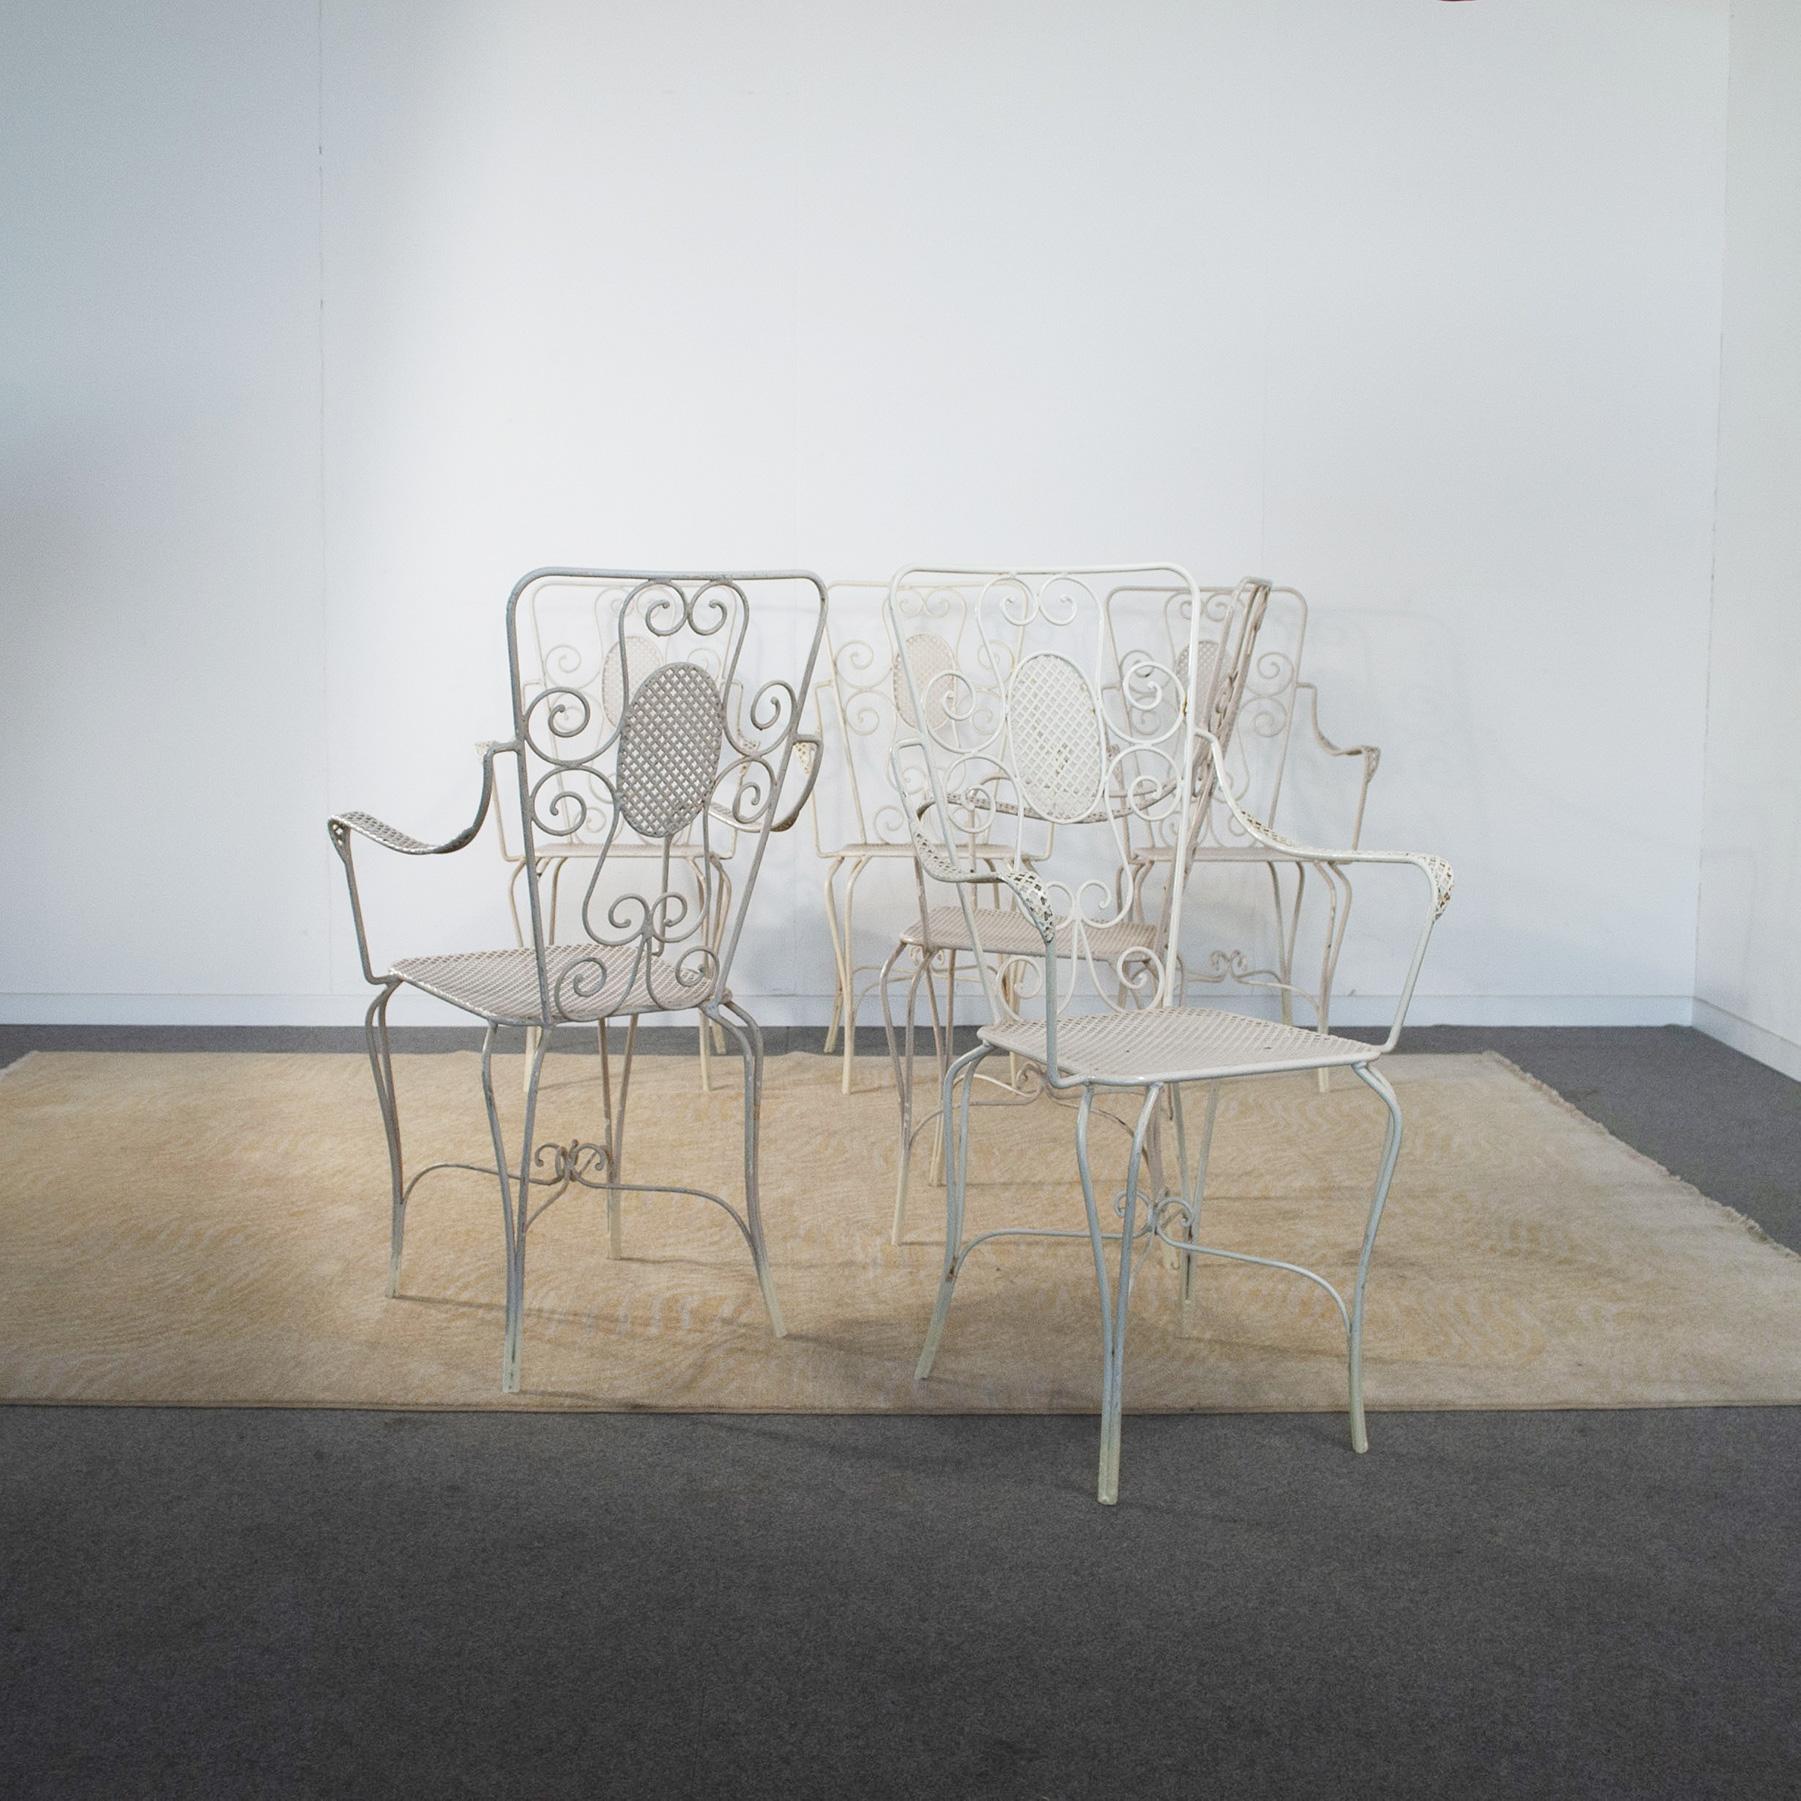 Casa E Giardino, Six White Painted Metal Chairs, 1942 In Good Condition For Sale In bari, IT